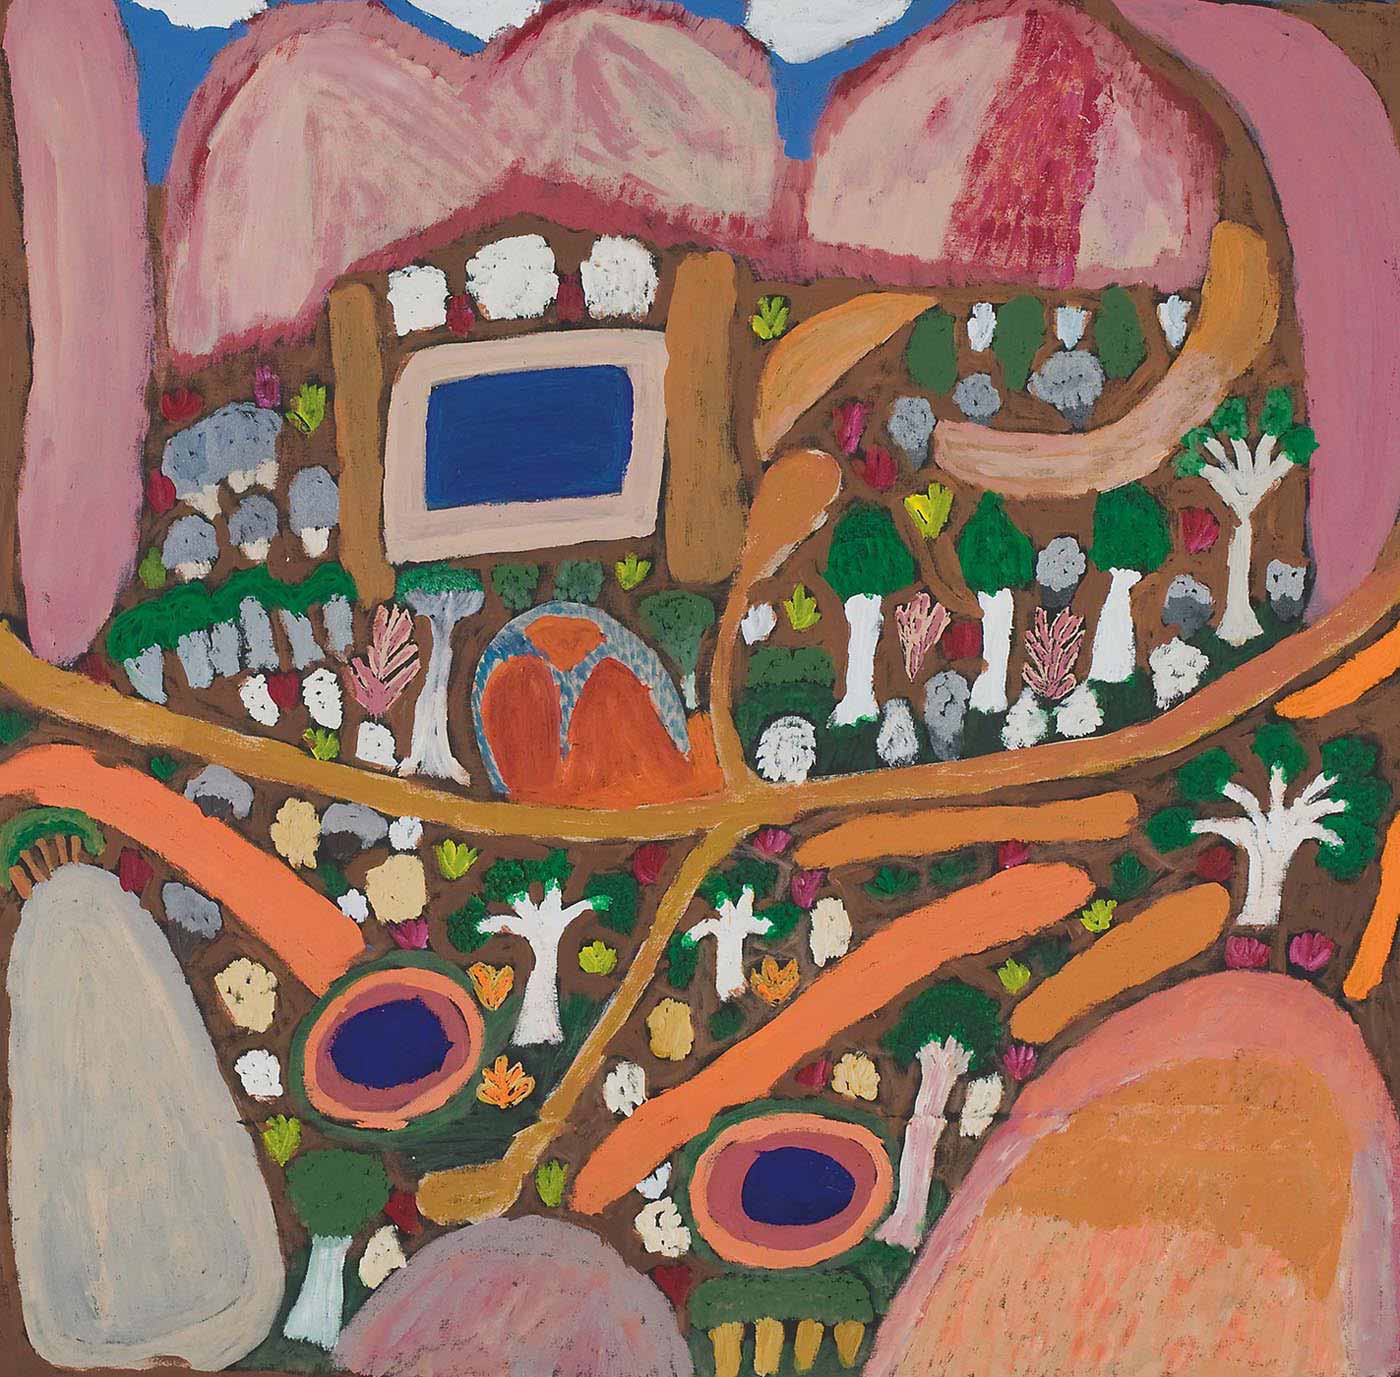 A square multicoloured painting on canvas with a blue rectangle outlined in beige towards the centre. Behind it are pink toned mountain-like shapes with a blue sky and white clouds. The painting has tree motifs in white and green, and bush like shapes in green with three large and a few small orange, grey and cream rock-like motifs around and below the blue square. The painting has an orange-brown line across the painting with other diagonal lines extending from or below it. There are two blue circles surrounded by brown and orange borders in the lower part of the painting. - click to view larger image